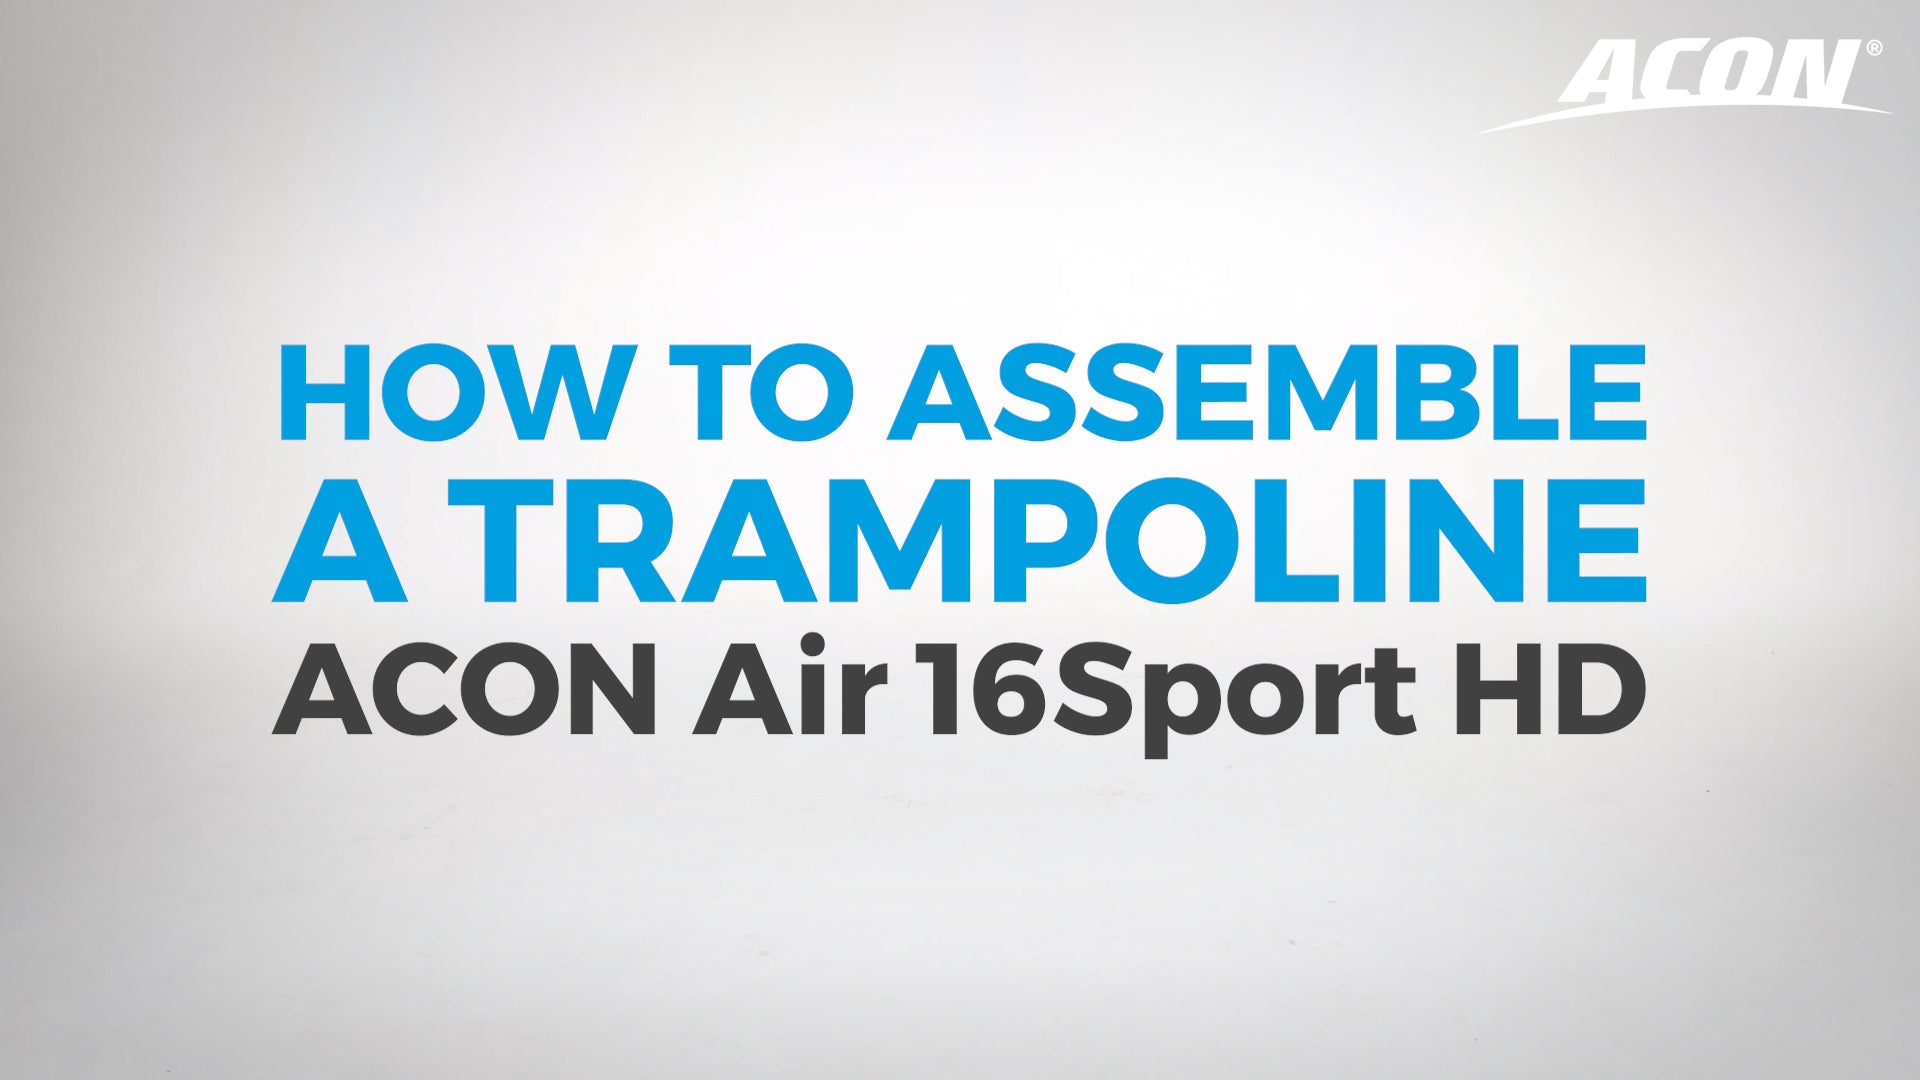 How to assemble a trampoline Acon Air 16 Sport HD